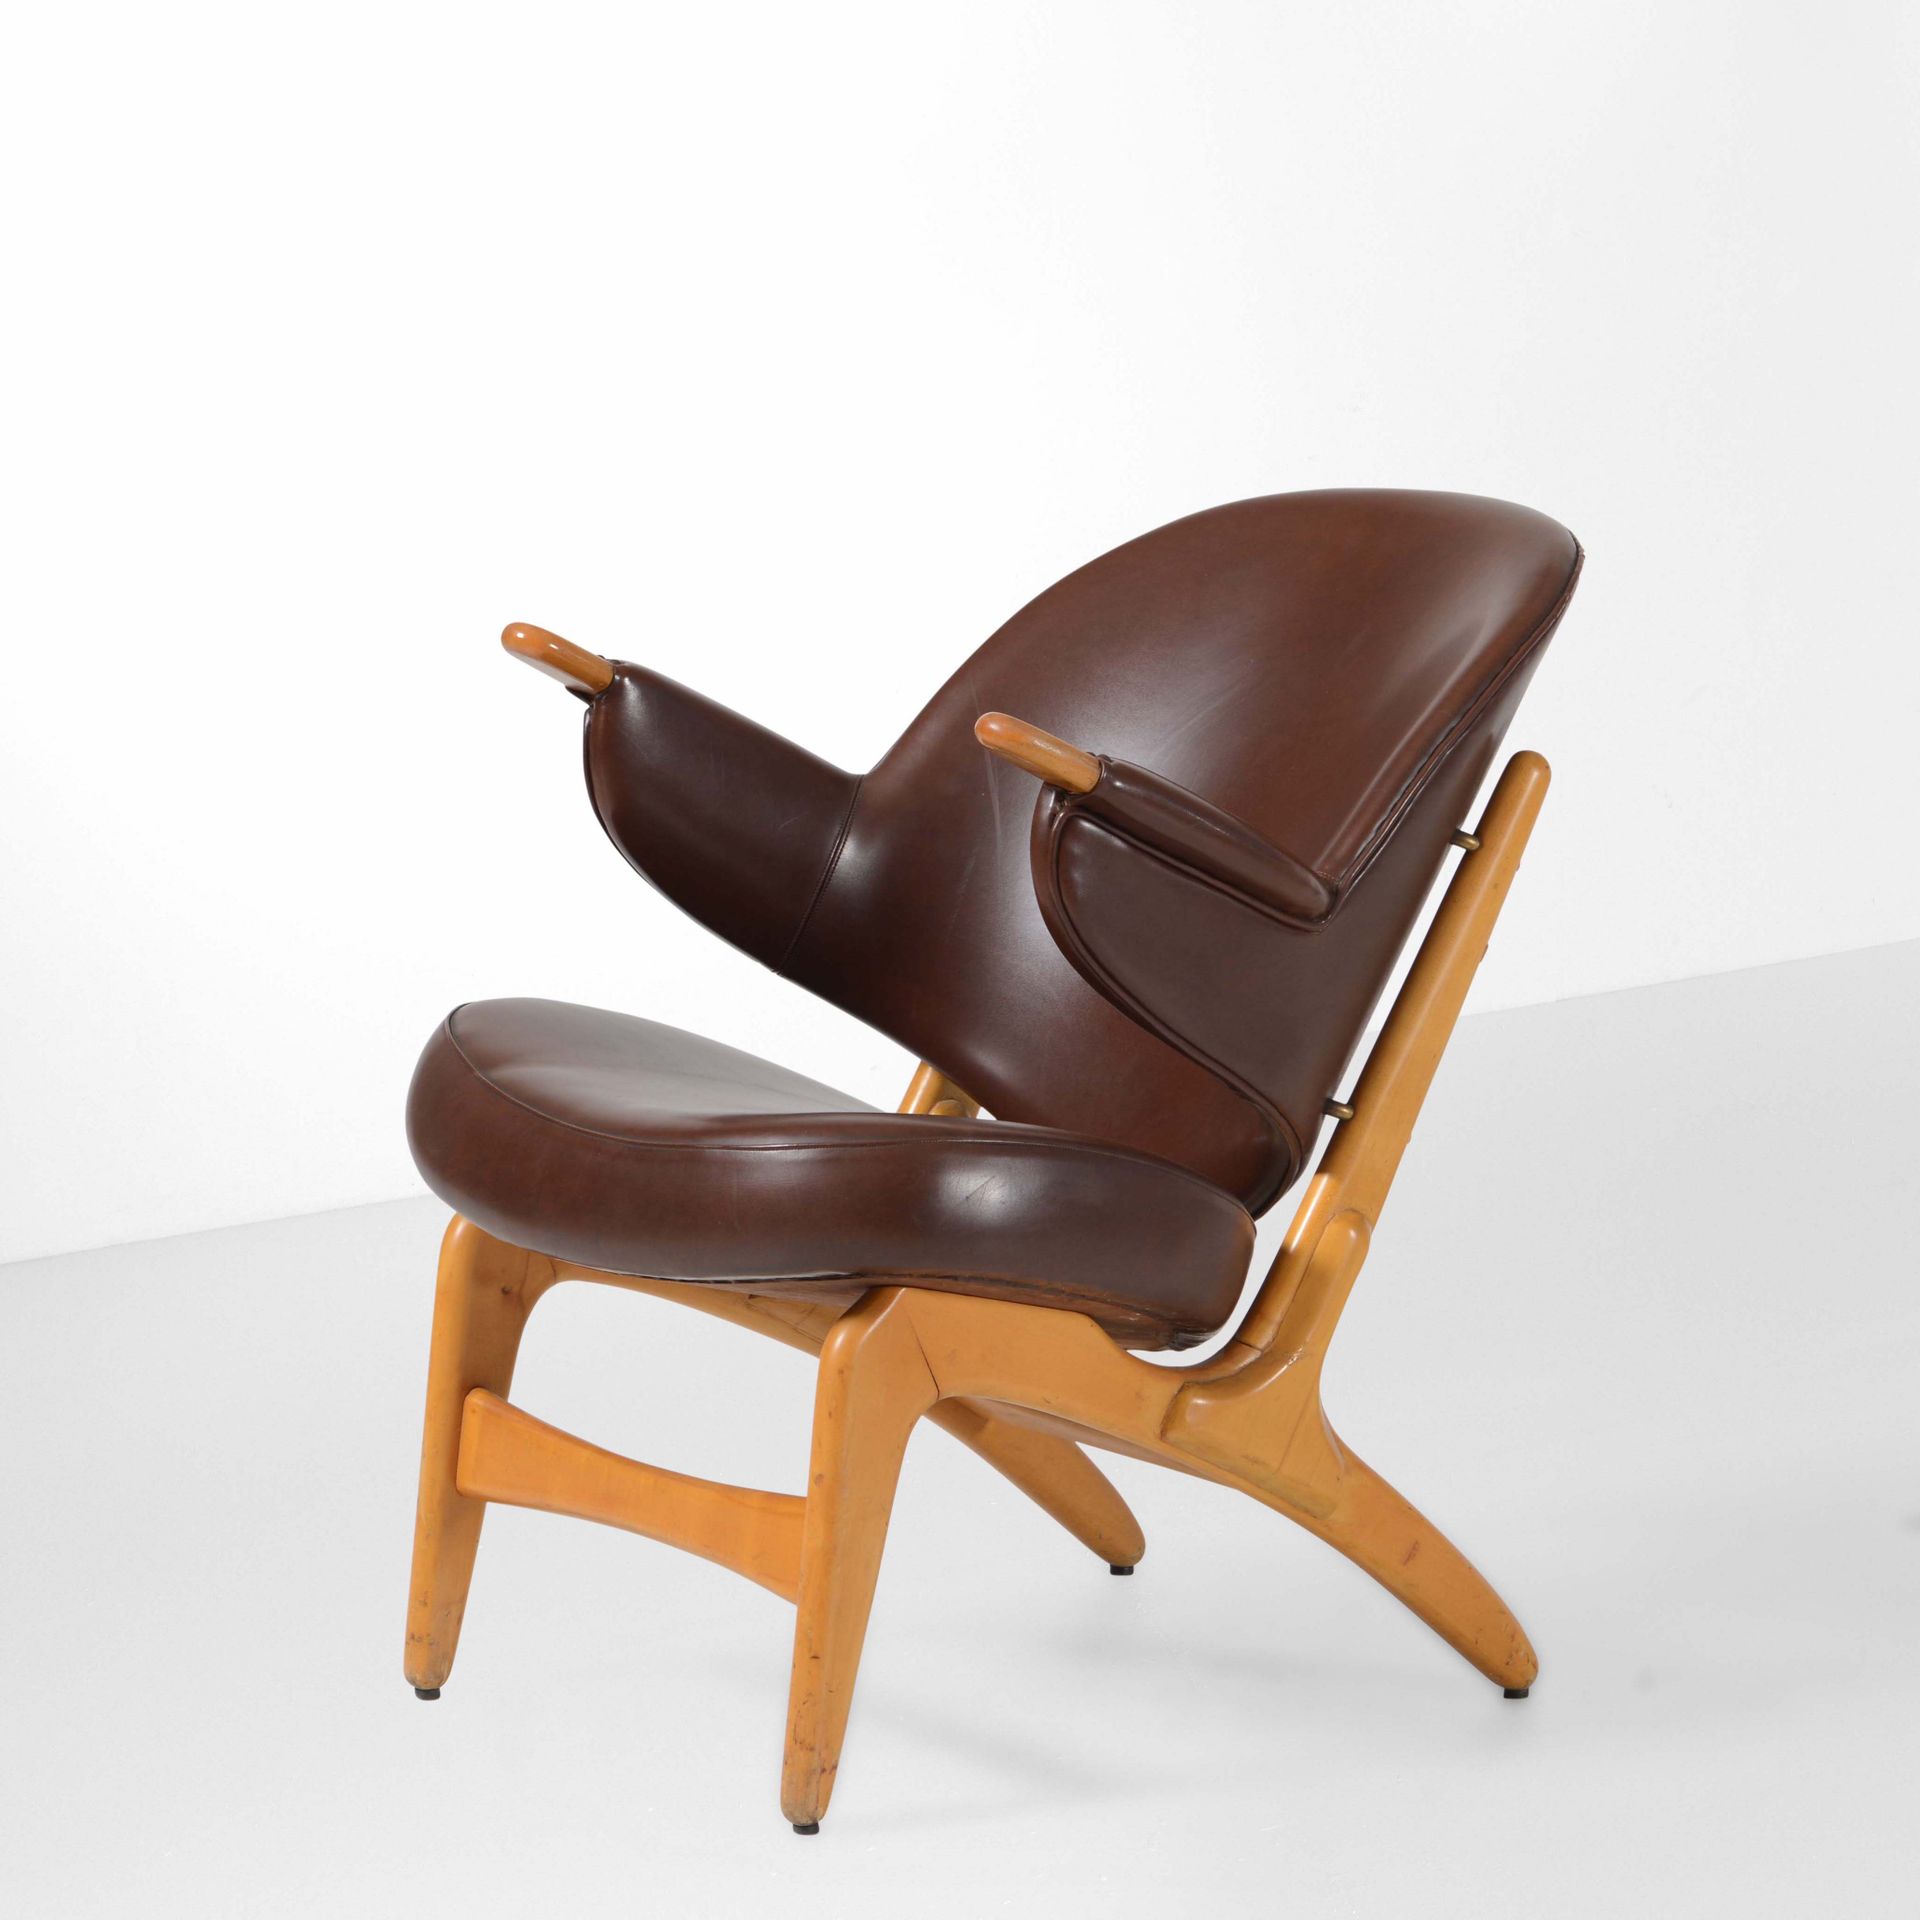 Arne Hovmand-Olsen, Small armchair with wooden frame and leather upholstery. Mad&hellip;